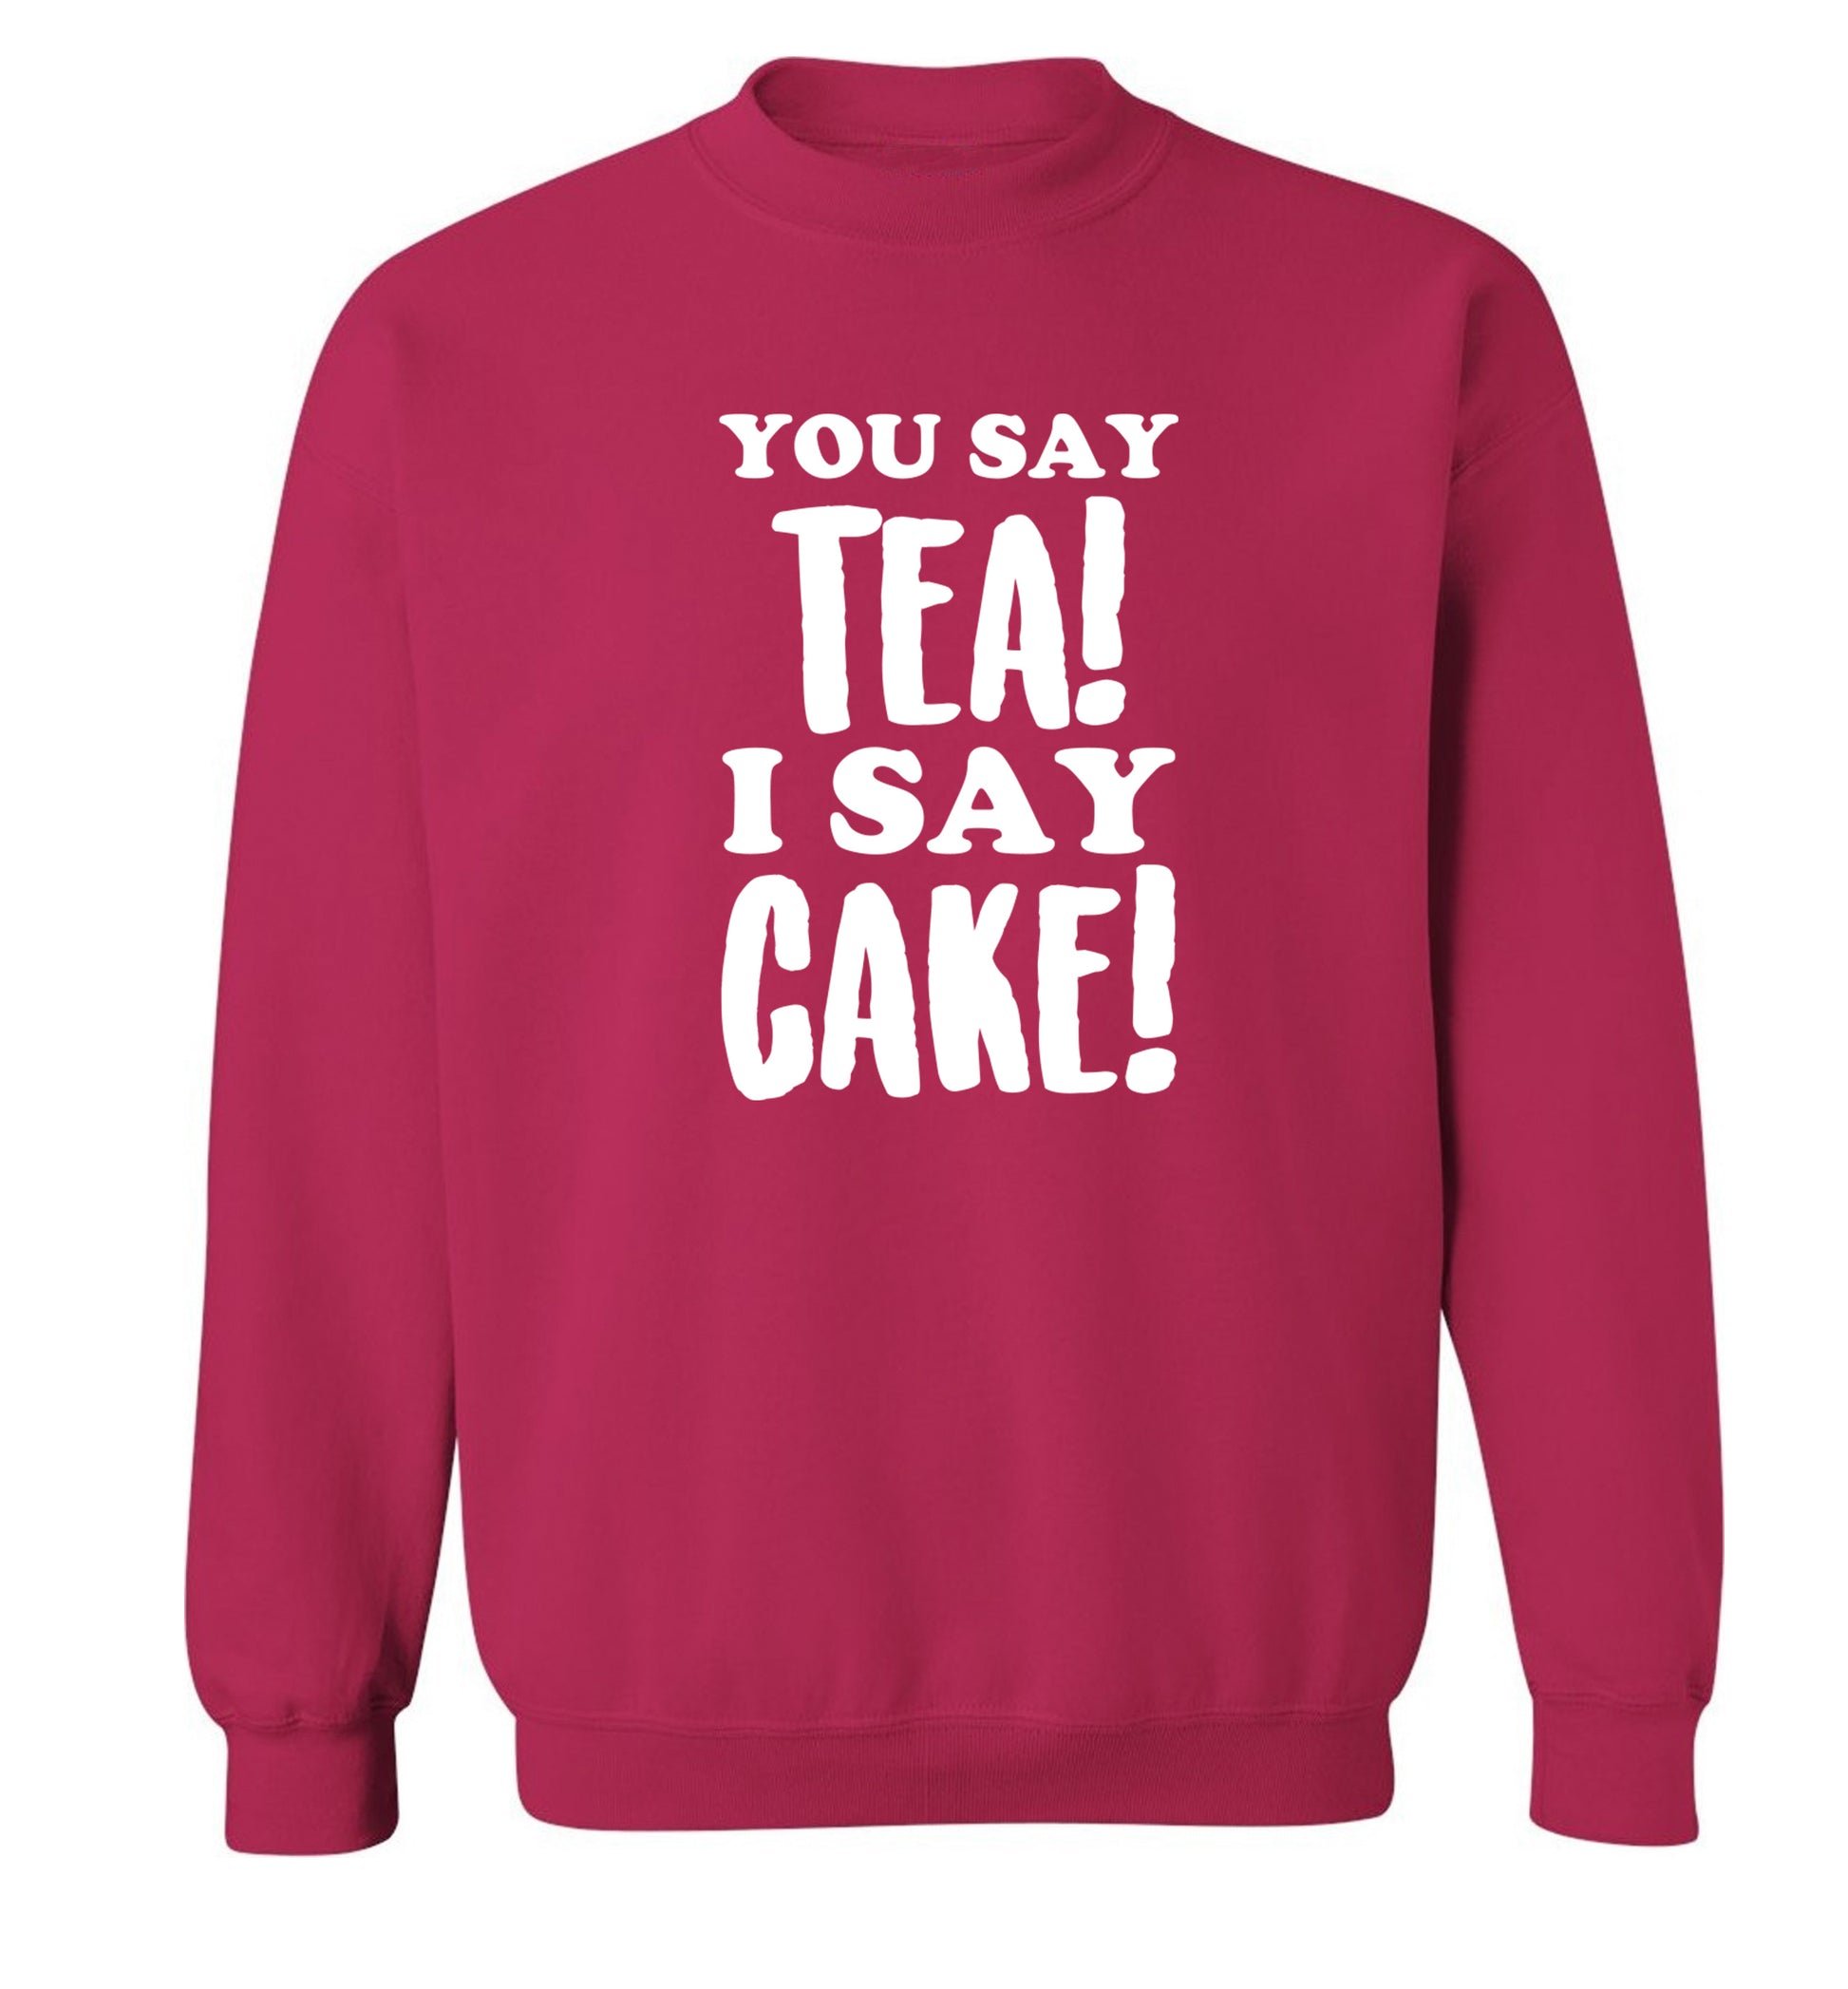 You say tea I say cake! Adult's unisex pink Sweater 2XL